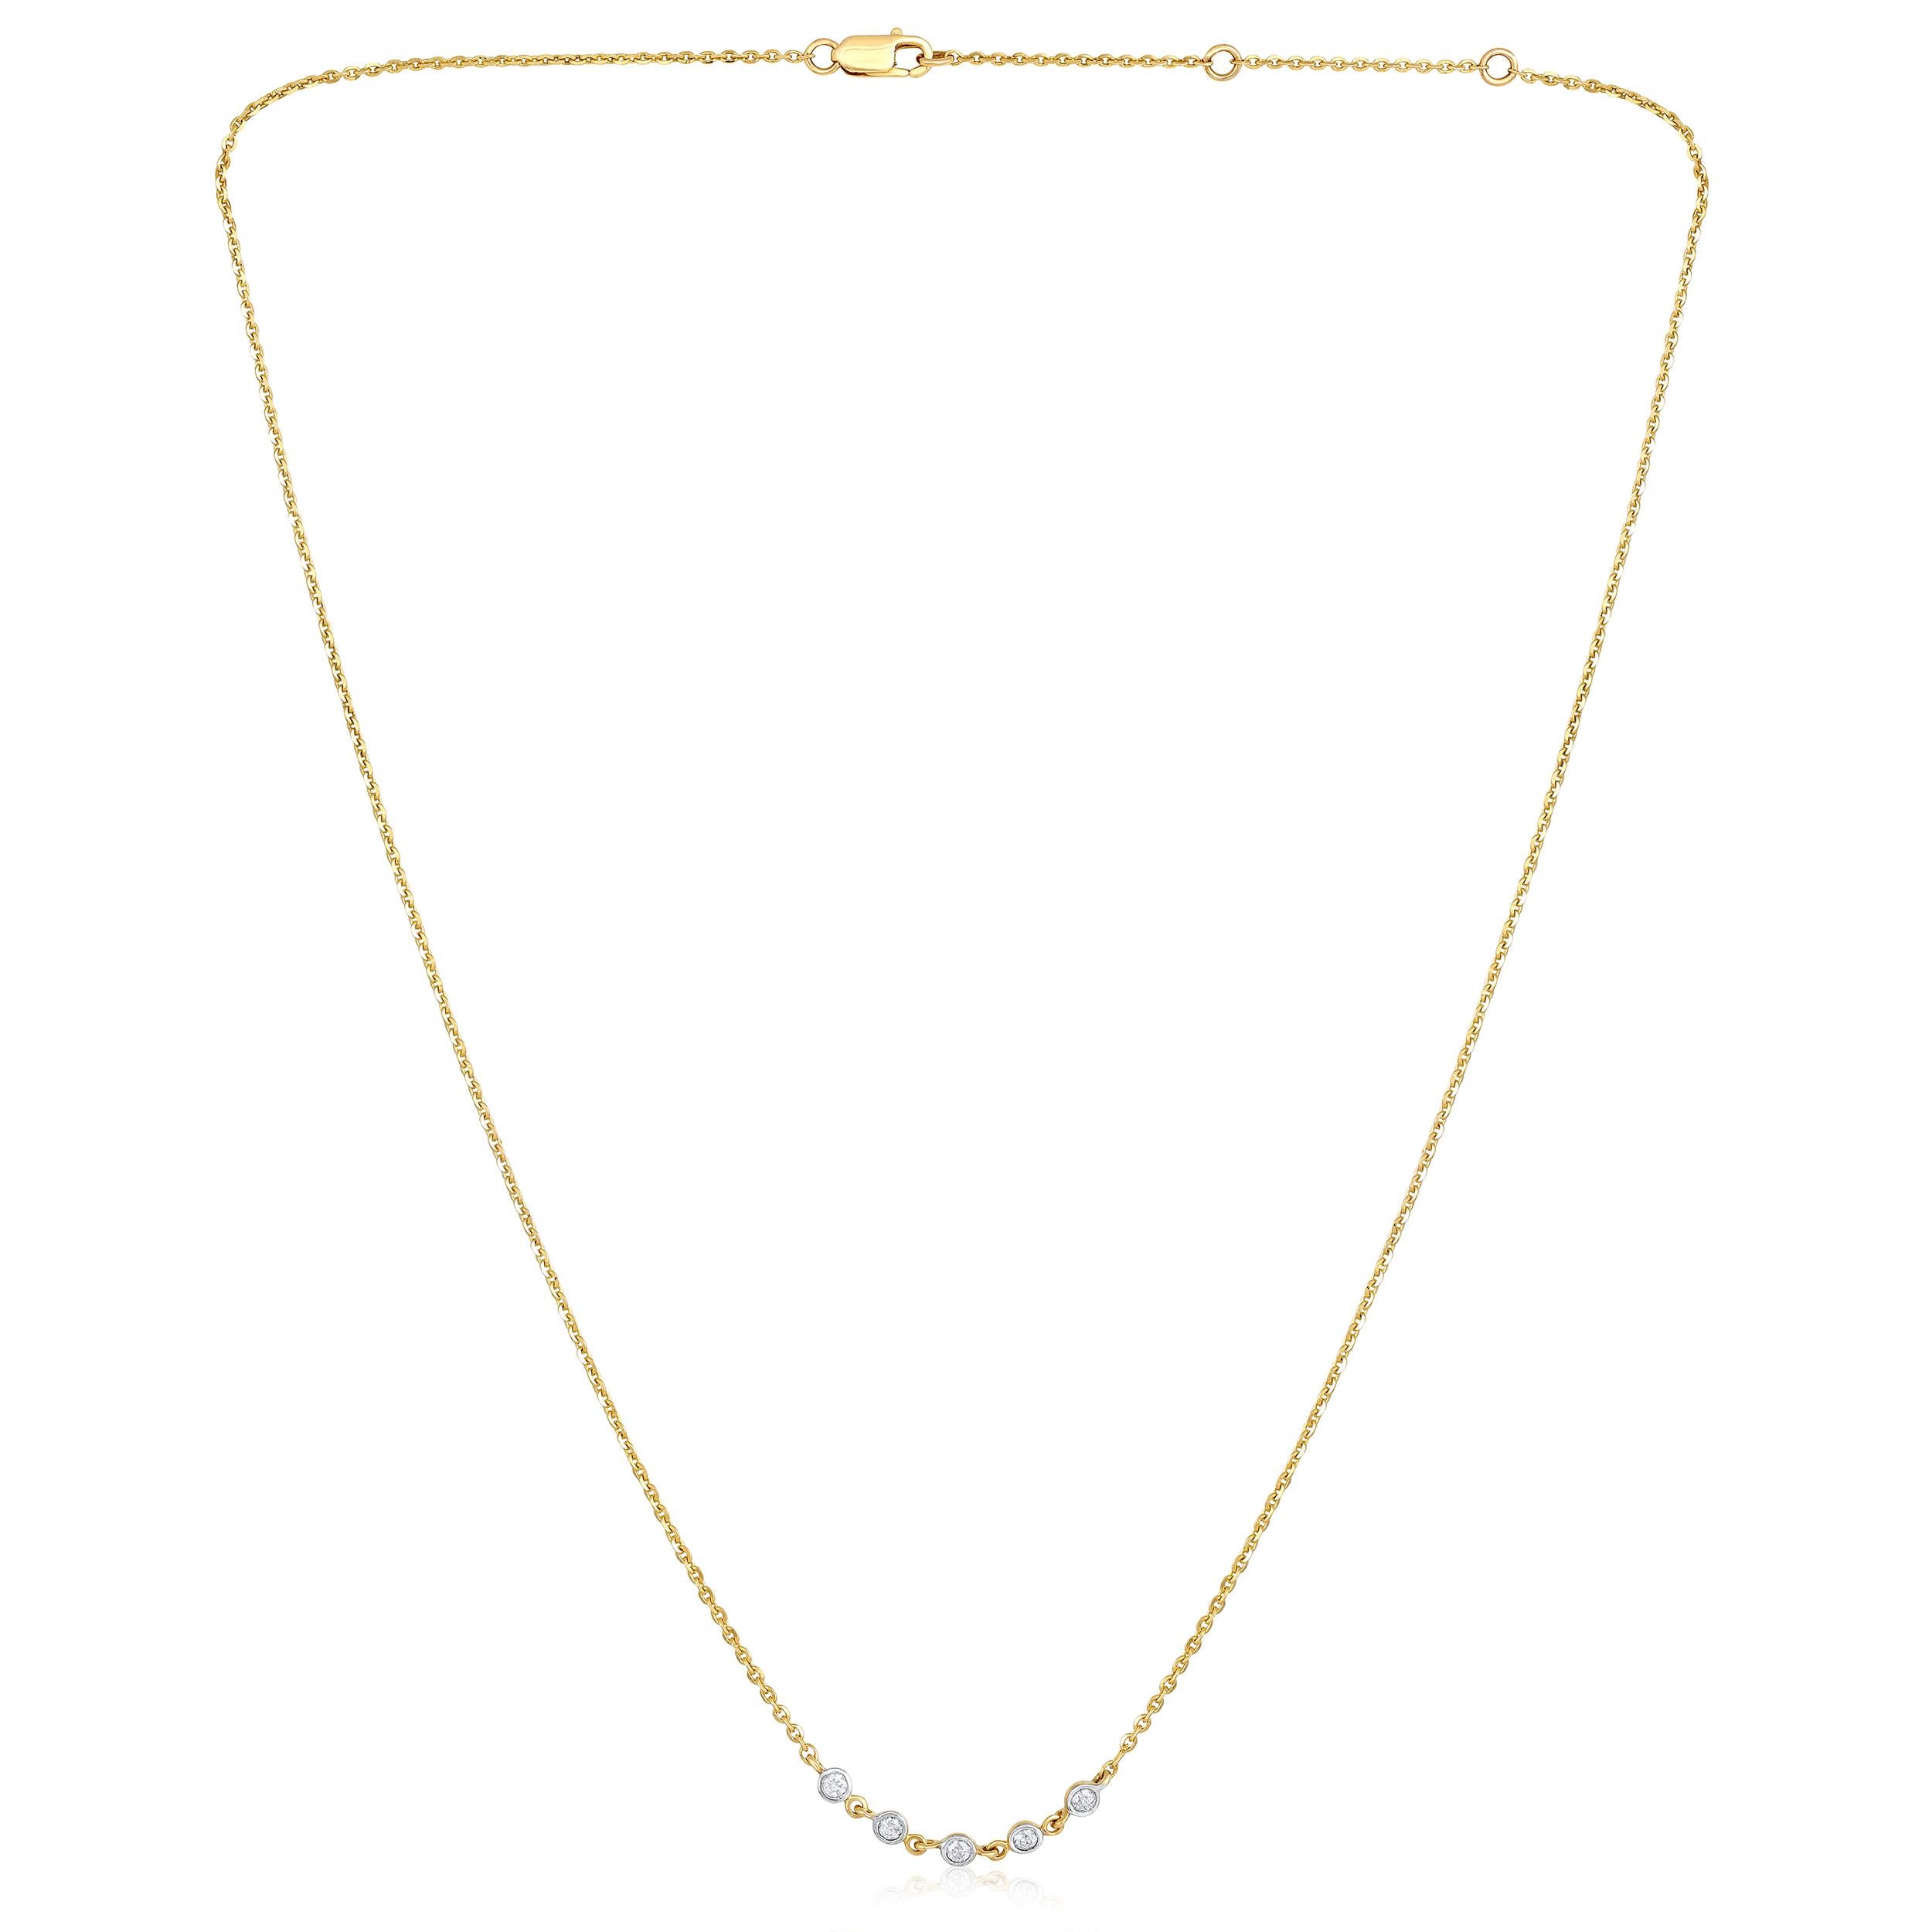 Crafted in 2.81 grams of 14K Yellow Gold, the necklace contains 5 stones of Round Diamonds with a total of 0.142 carat in F-G color and I1-I2 carat. The necklace length is 18 inches.

CONTEMPORARY AND TIMELESS ESSENCE: Crafted in 14-karat/18-karat